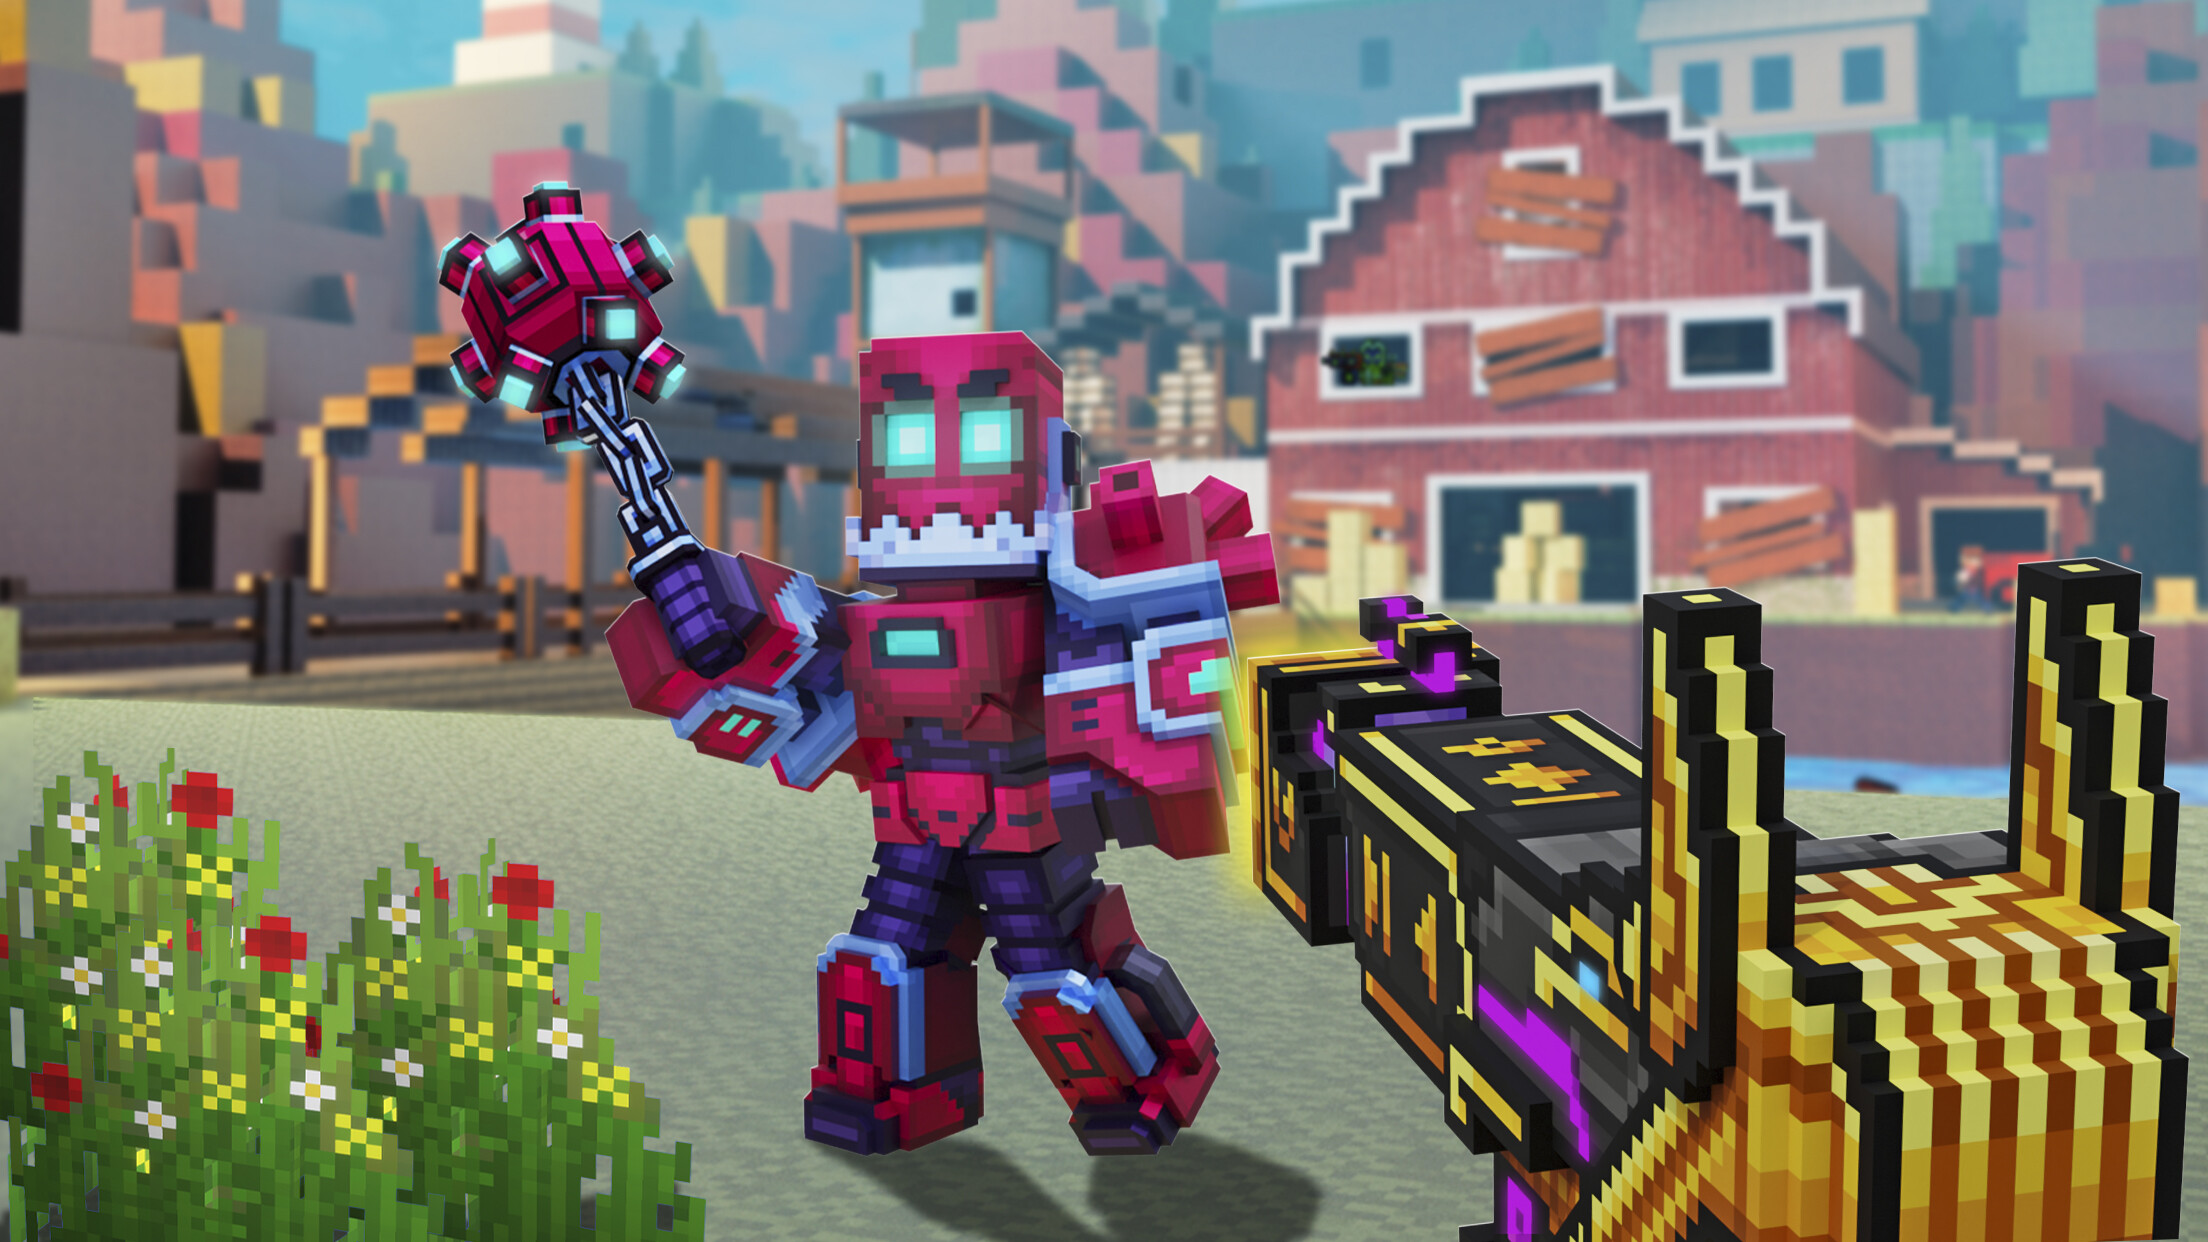 This free multiplayer FPS looks like Minecraft with guns